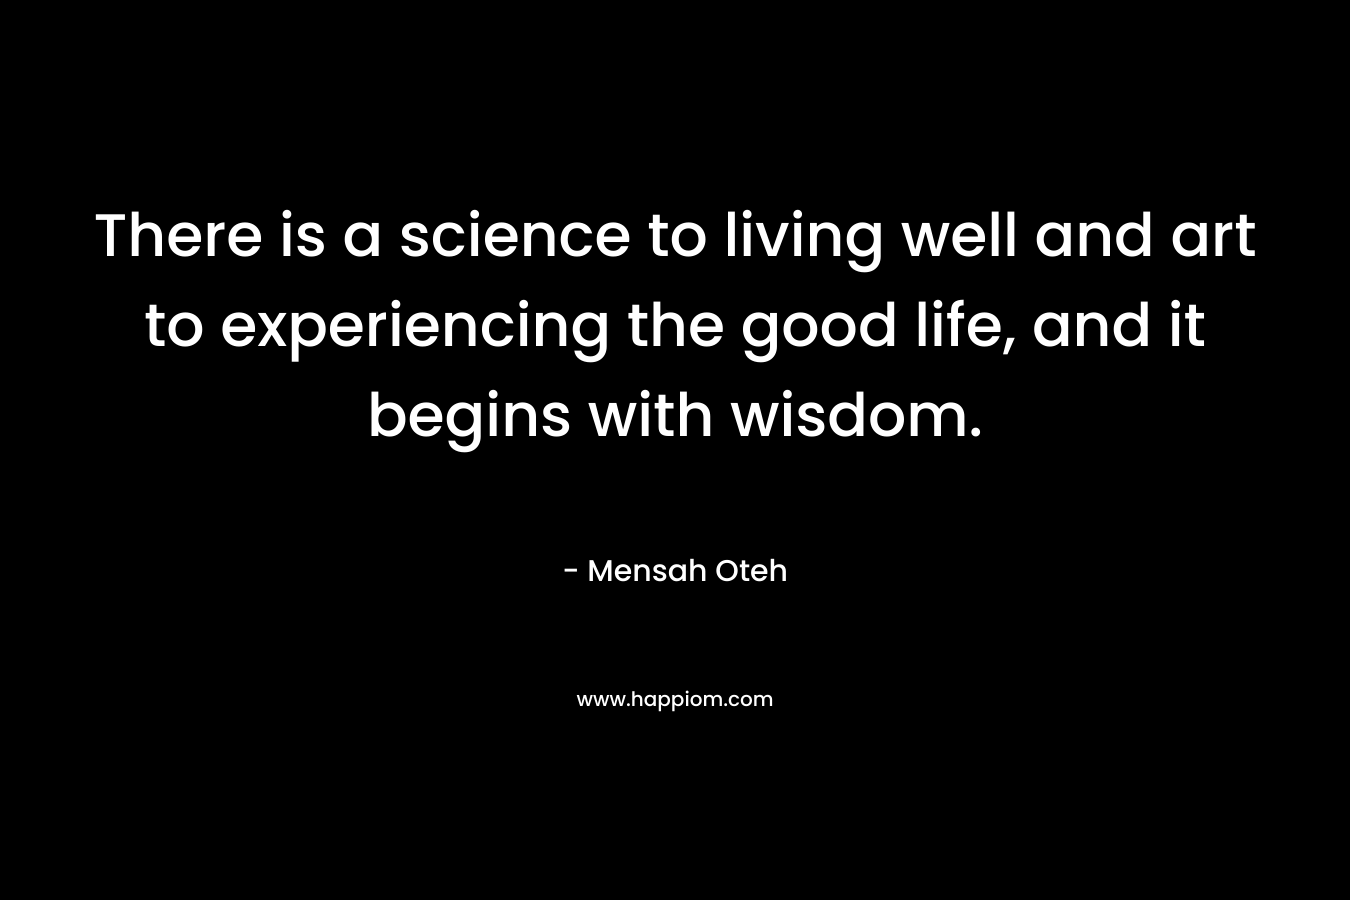 There is a science to living well and art to experiencing the good life, and it begins with wisdom.